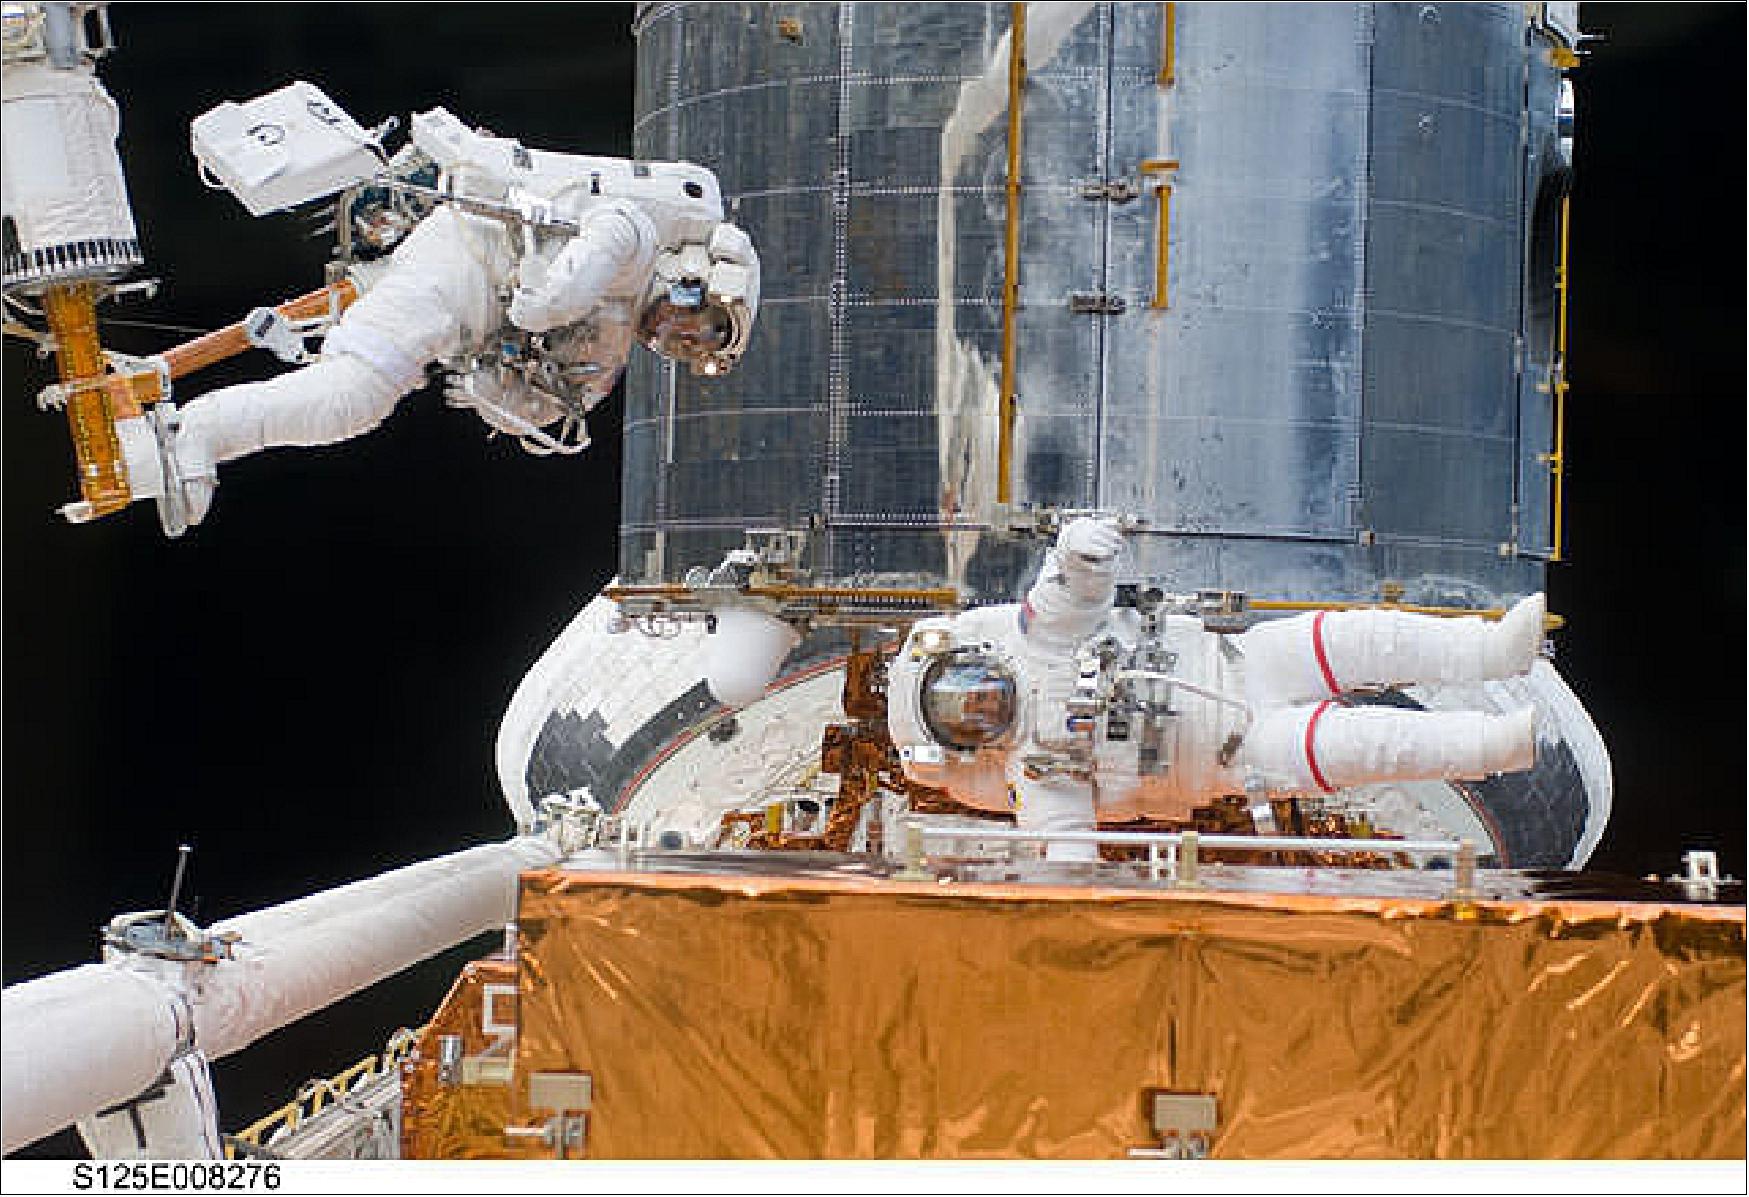 Figure 69: STS-125 astronauts John Grunsfeld and Andrew Feustel work together on EVA 3 to navigate the exterior of the Hubble Space Telescope on the end of the remote manipulator system arm, controlled from inside Atlantis' crew cabin (image credit: NASA)